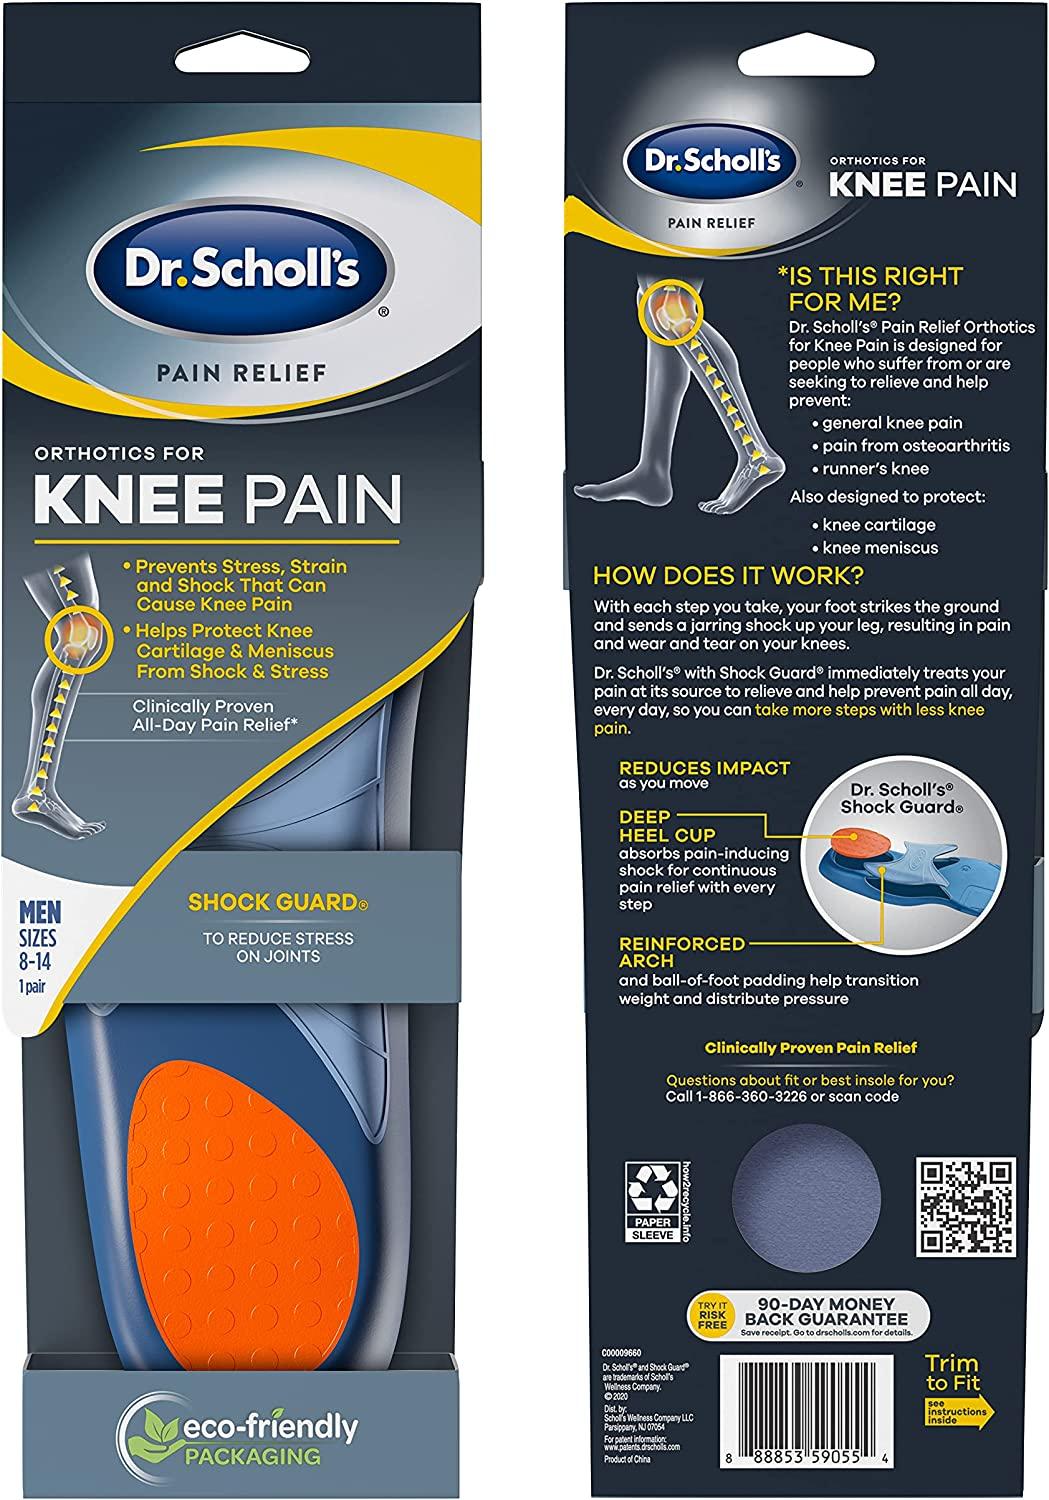 Dr. Scholl's KNEE Pain Relief Orthotics. Immediate and All-Day Relief from  Knee Pain (for Men's 8-14, also available for Women's 5.5-9).